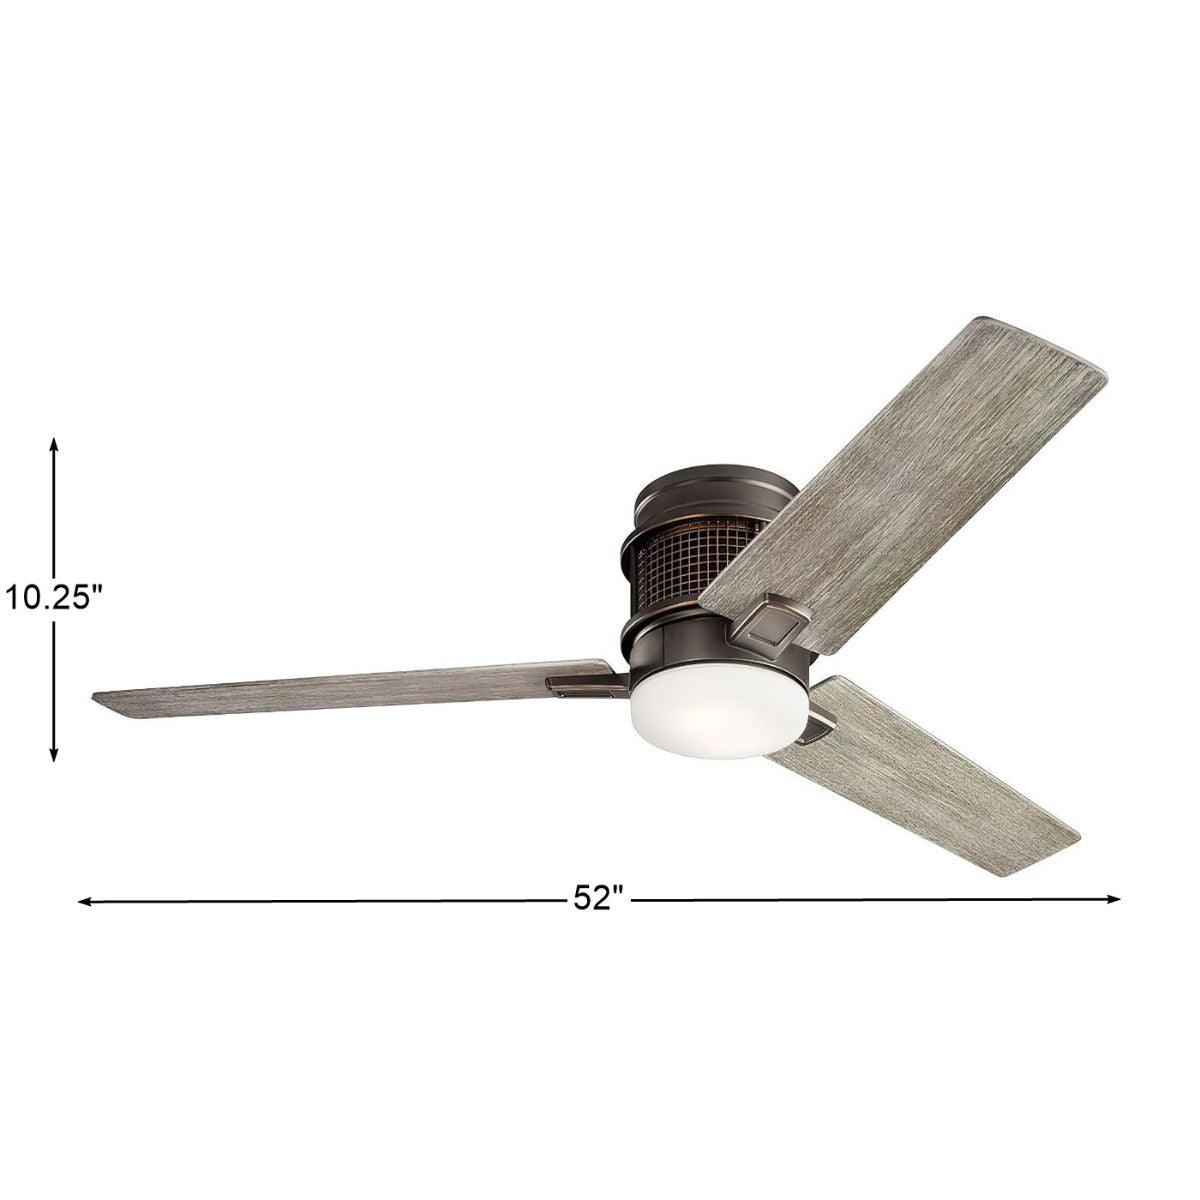 Chiara 52 Inch Rustic Caged Ceiling Fan With Light, Wall Control Included